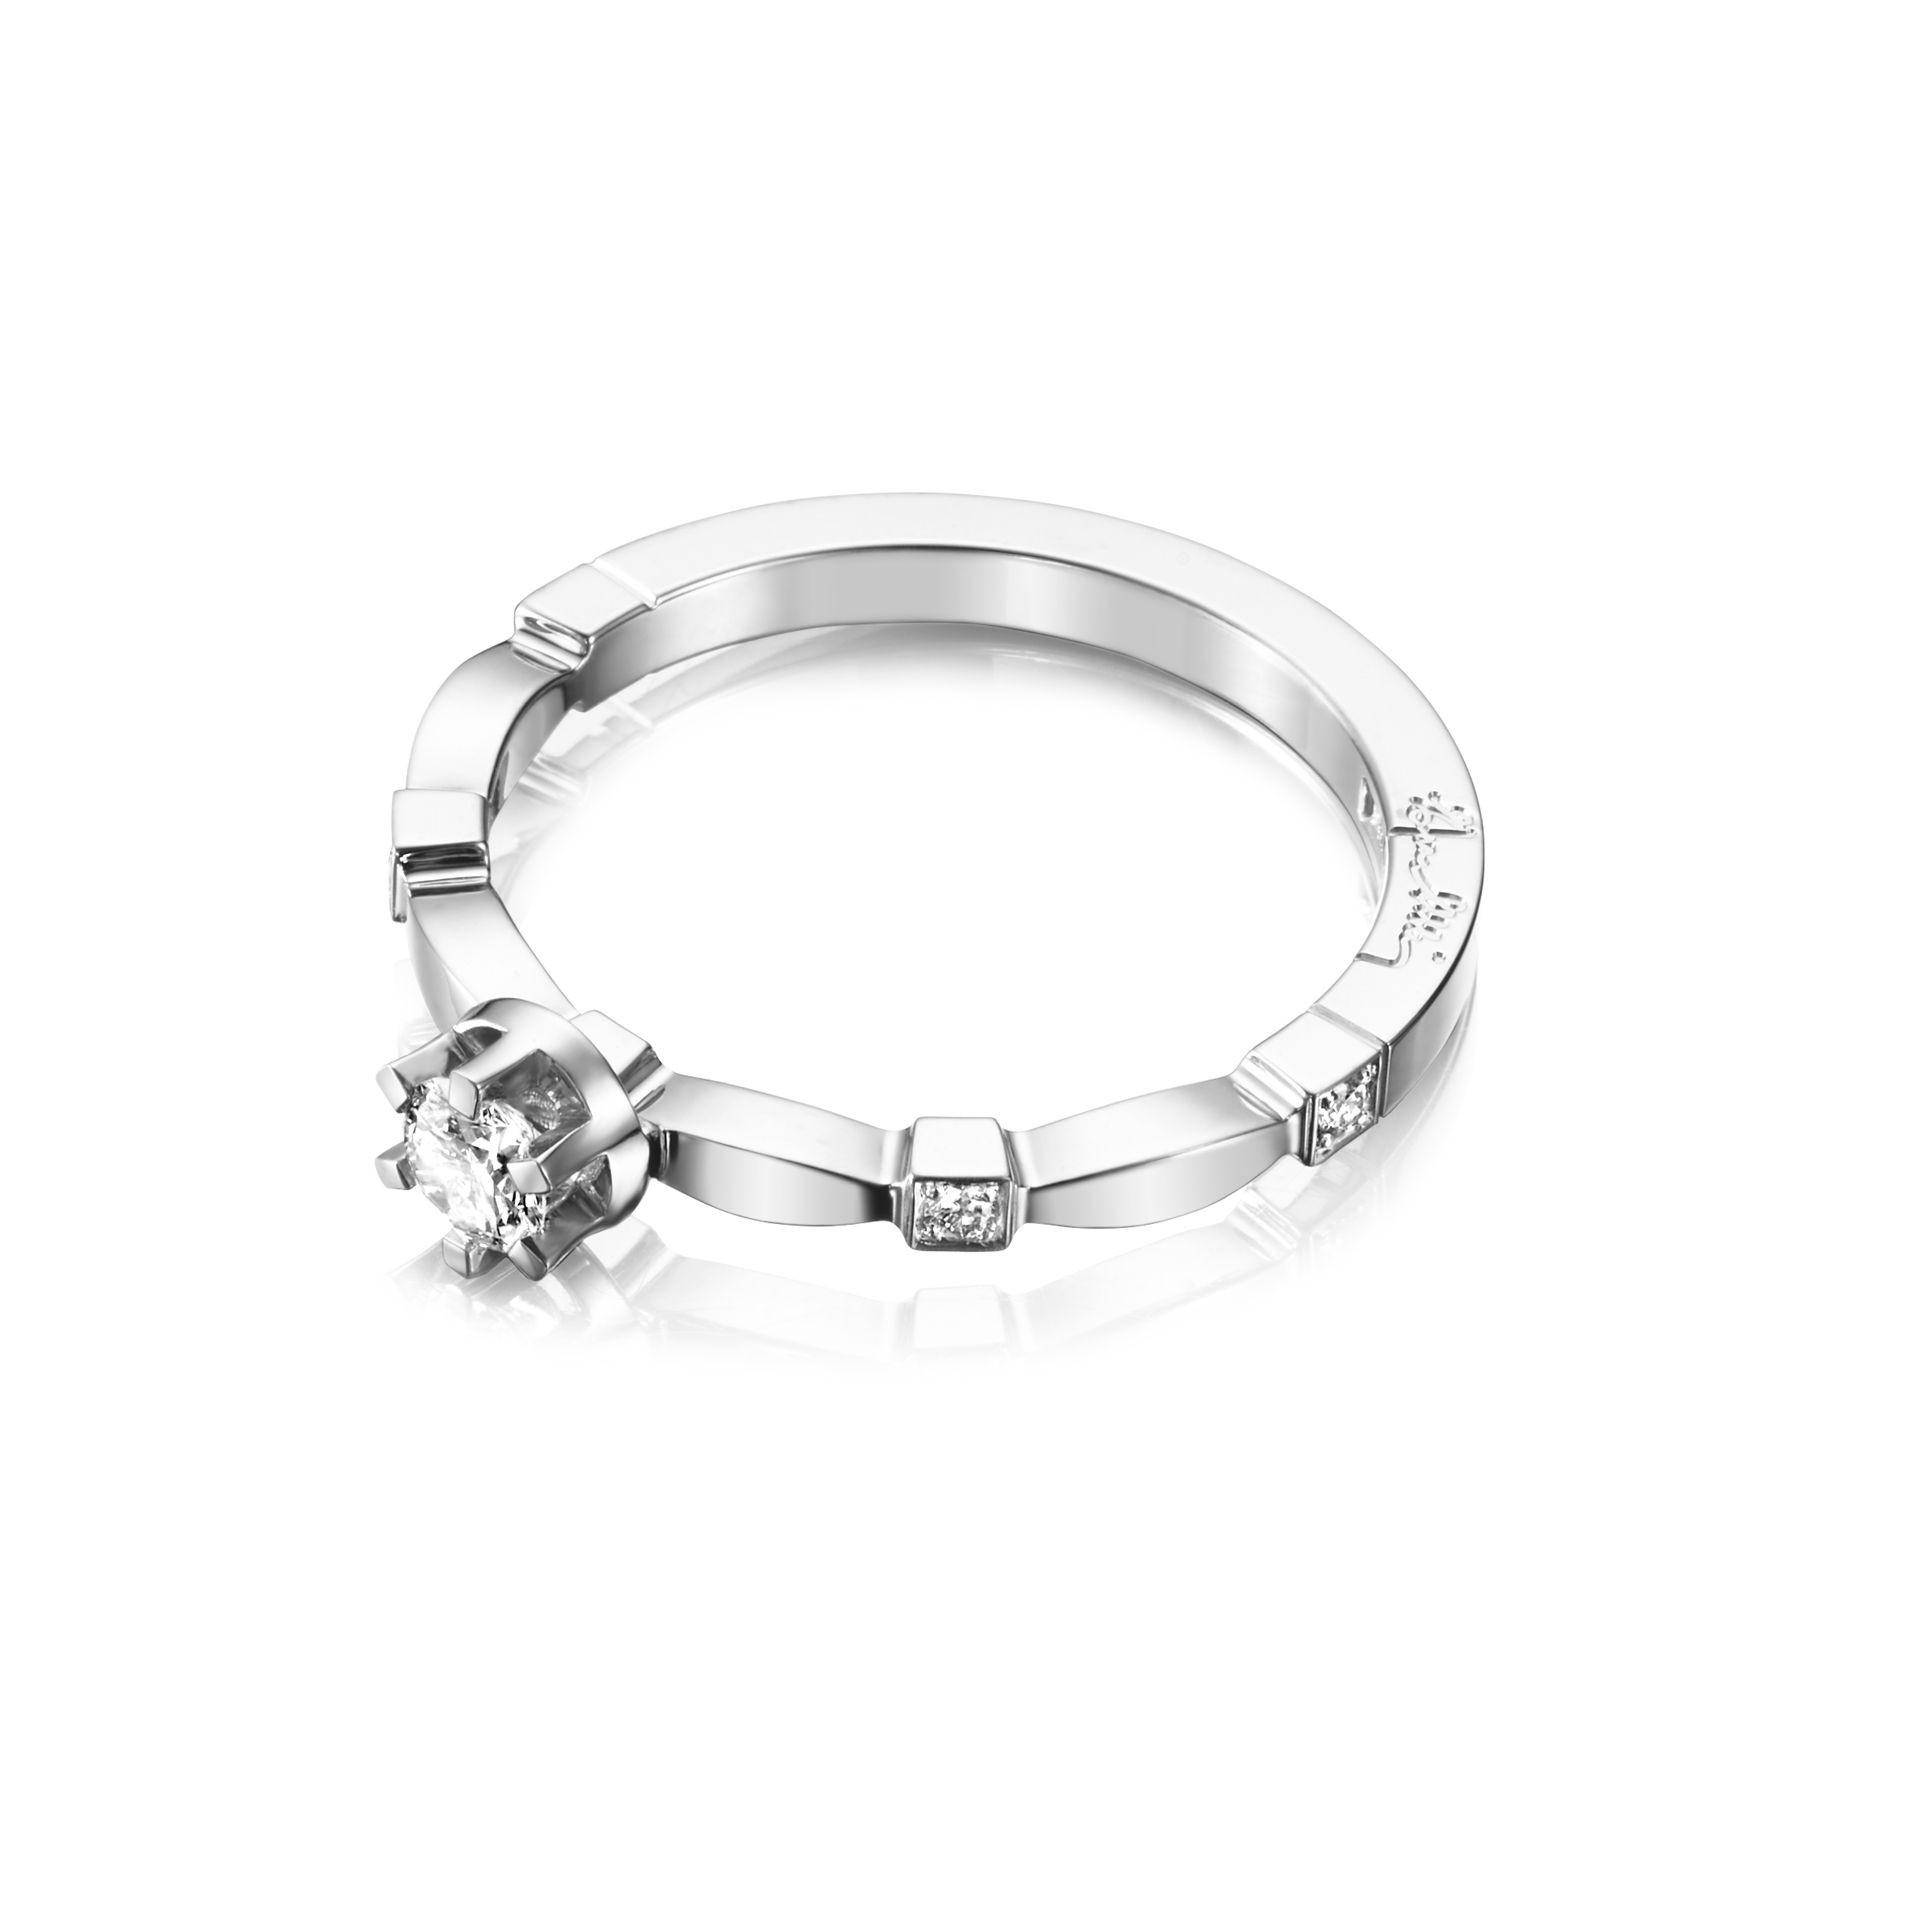 Forget Me Not Star Ring